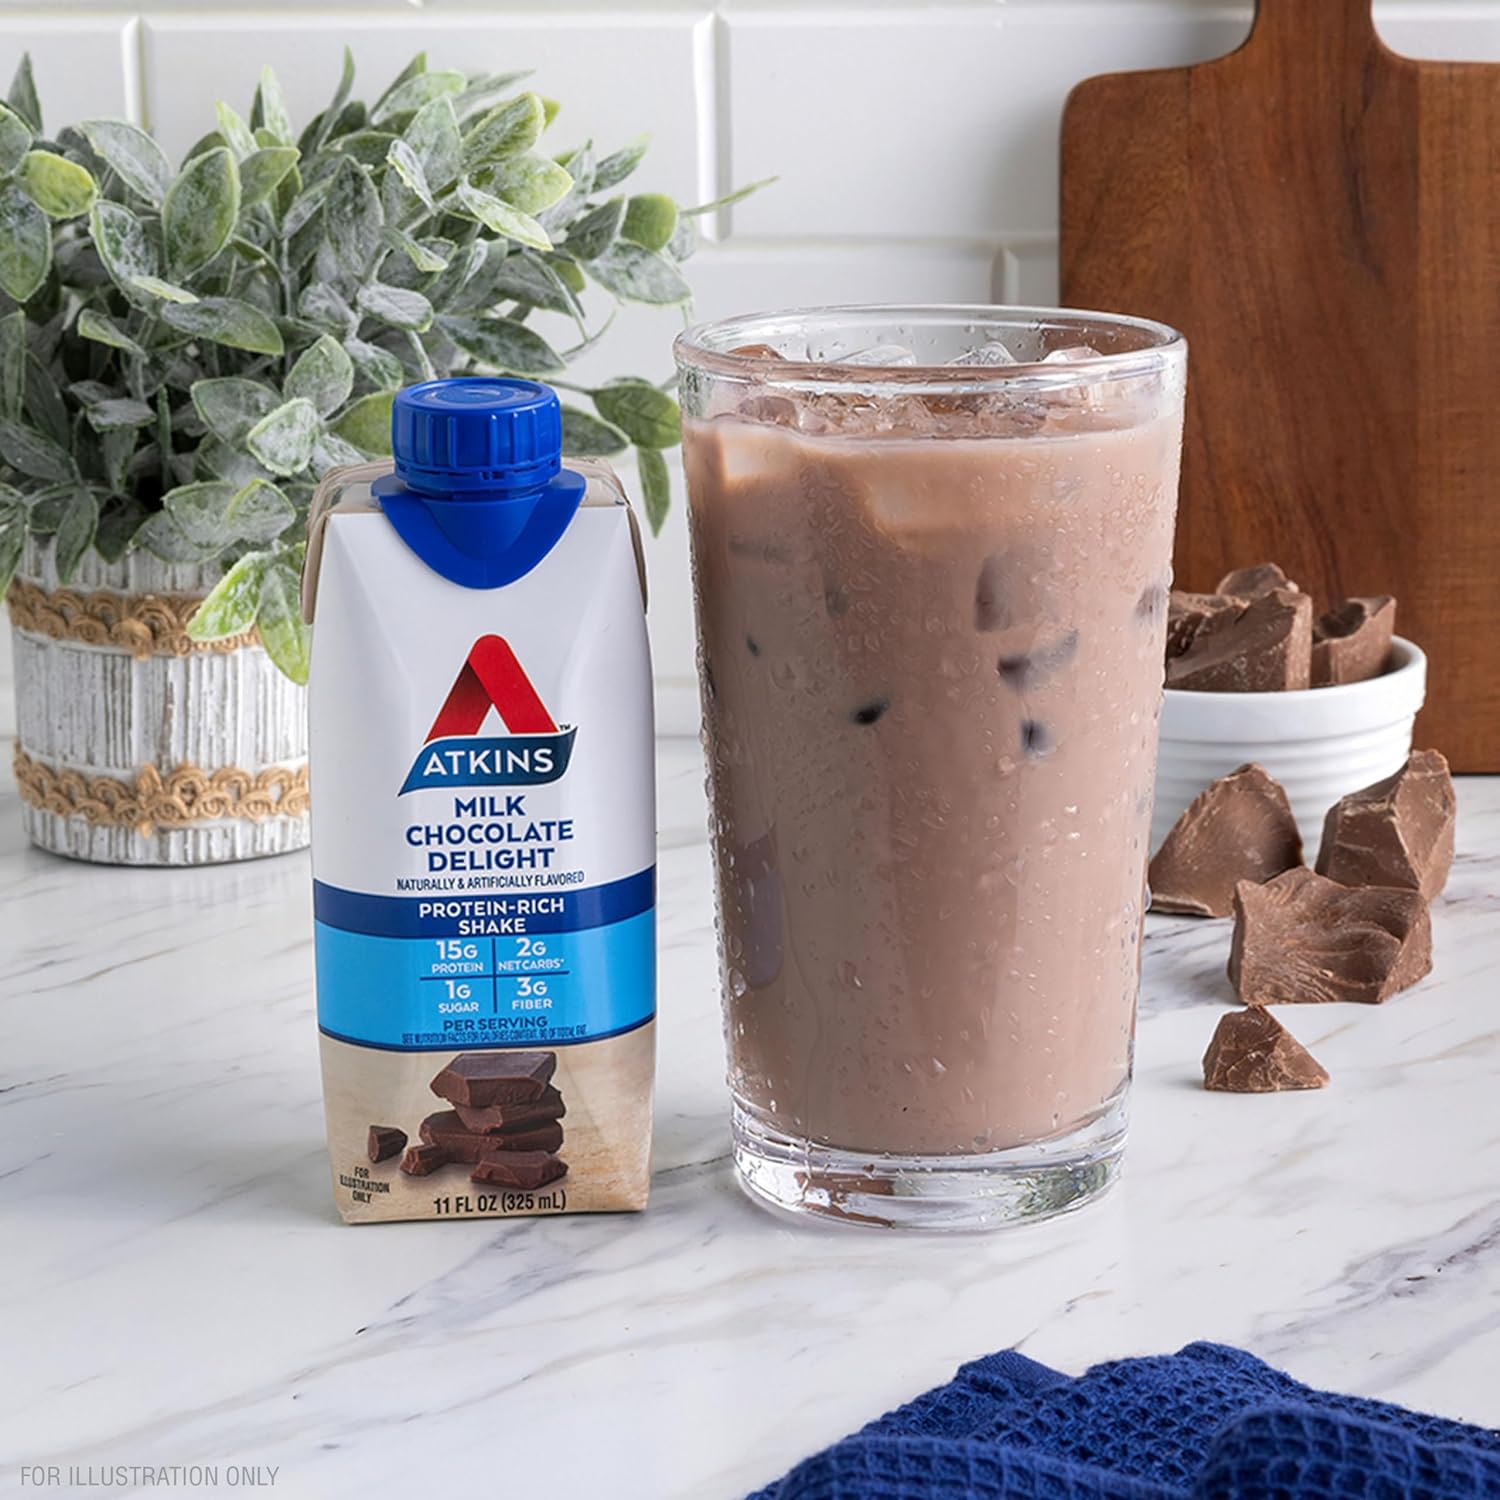 Atkins Milk Chocolate Delight Protein Shake, 15g Protein, Low Glycemic, 2g Net Carb, 1g Sugar, Keto Friendly, 12 Count : Health & Household